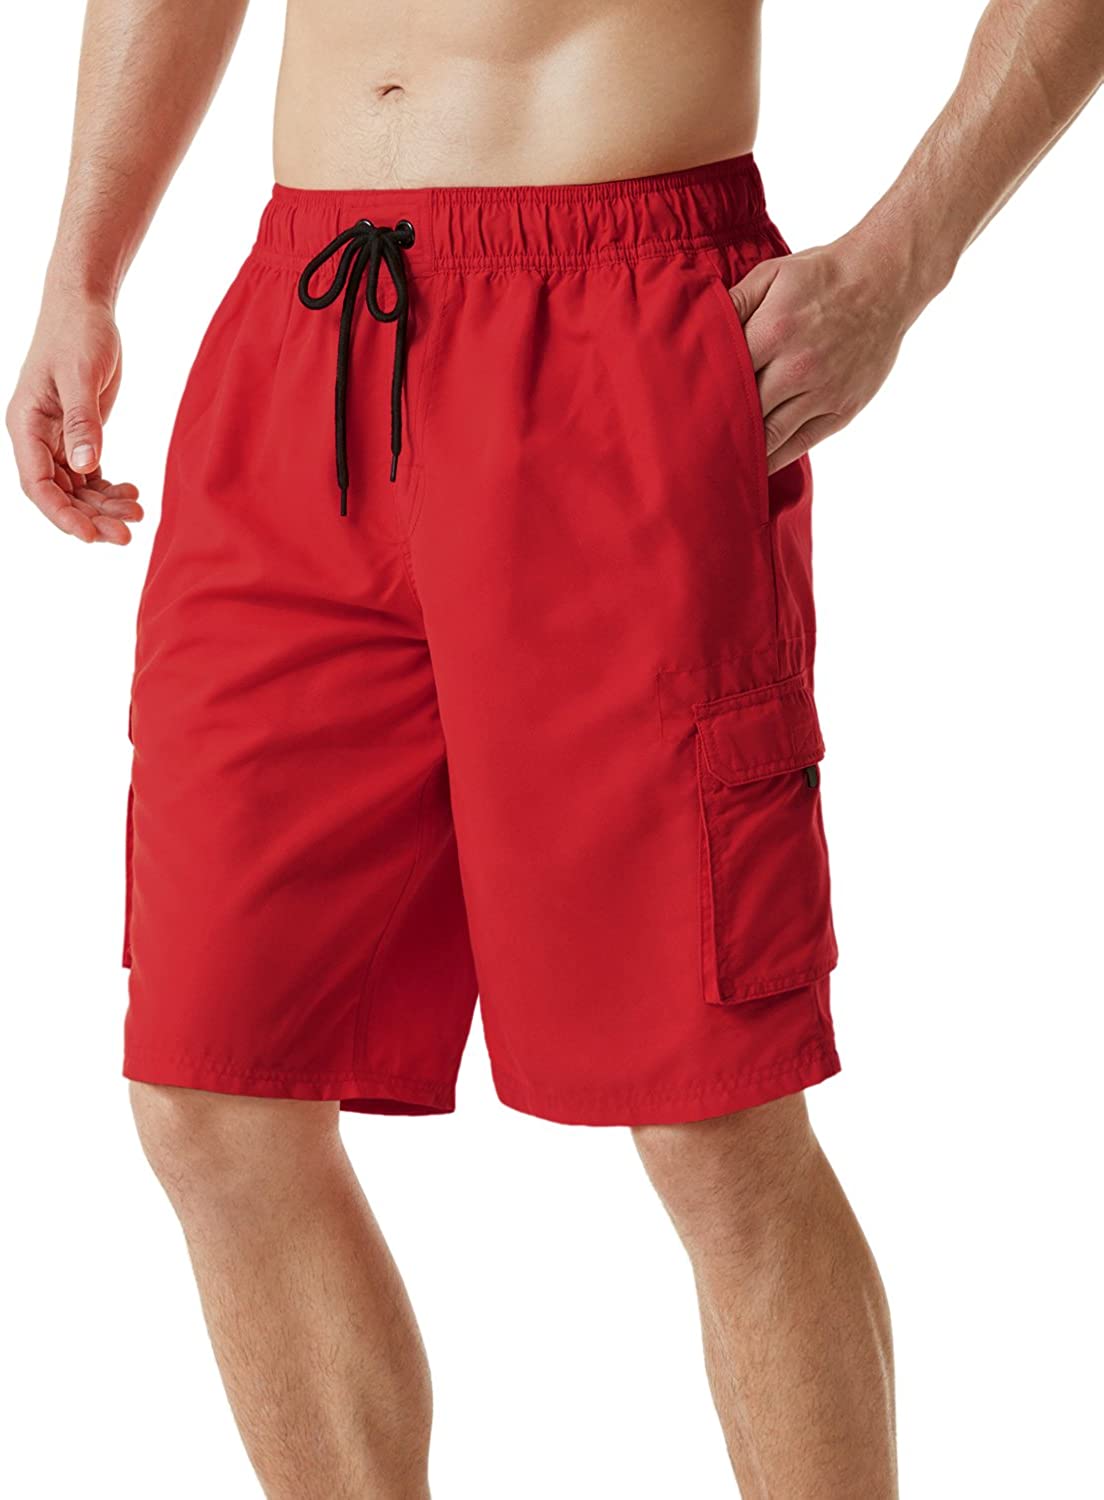 Bathing Suits with Inner Mesh Lining and Pockets Quick Dry Beach Board Shorts TSLA Mens 11 Inches Swim Trunks 